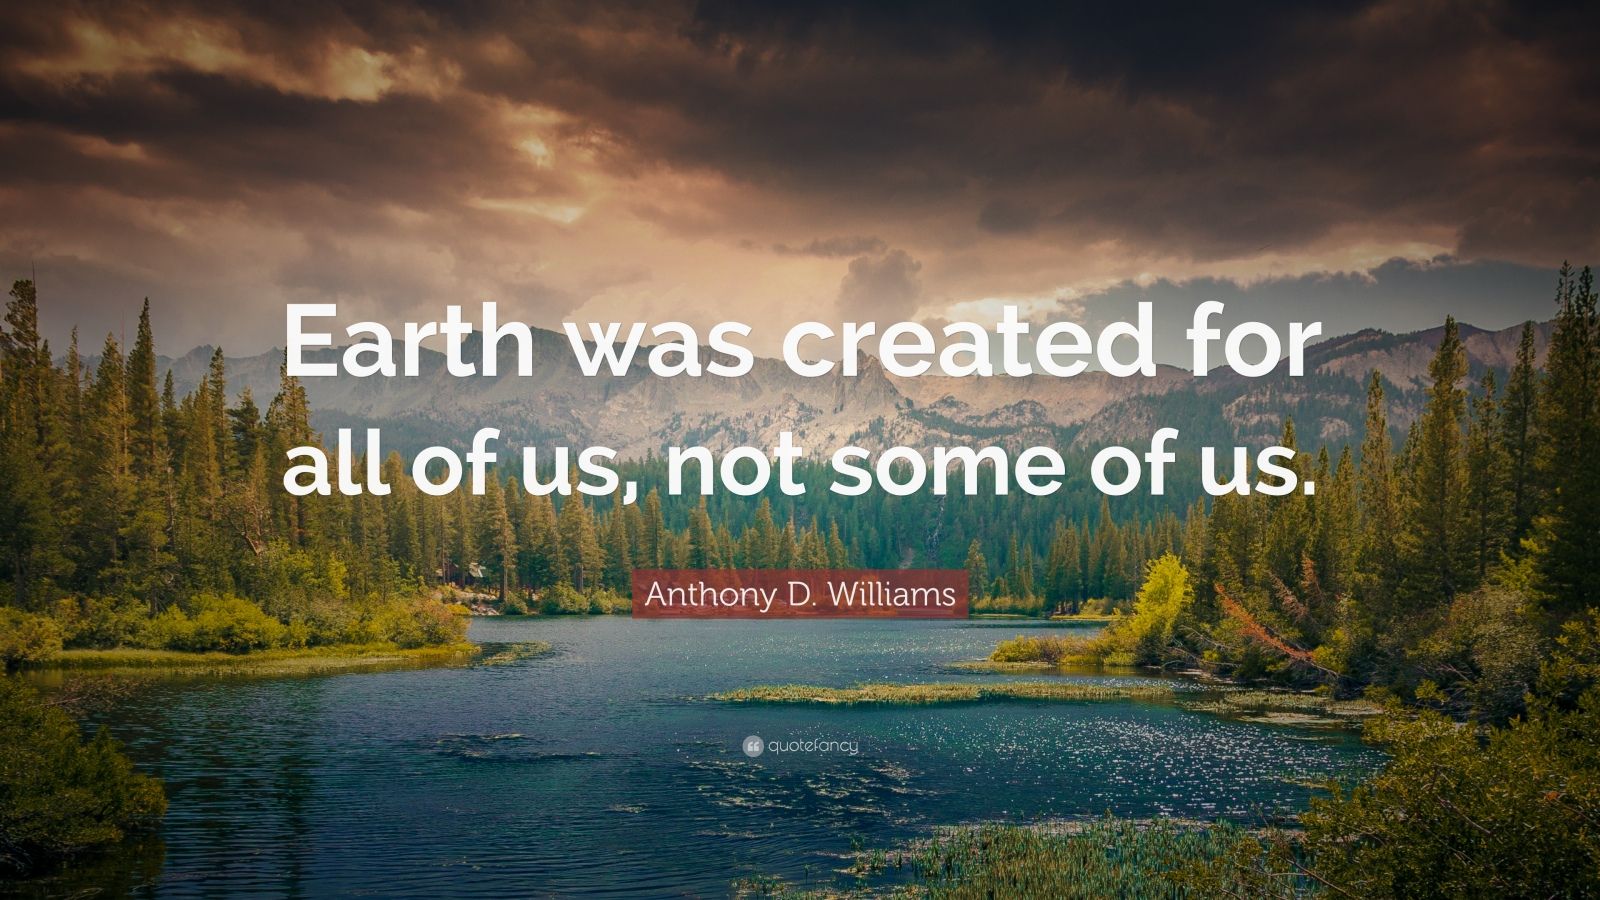 Anthony D. Williams Quote: 